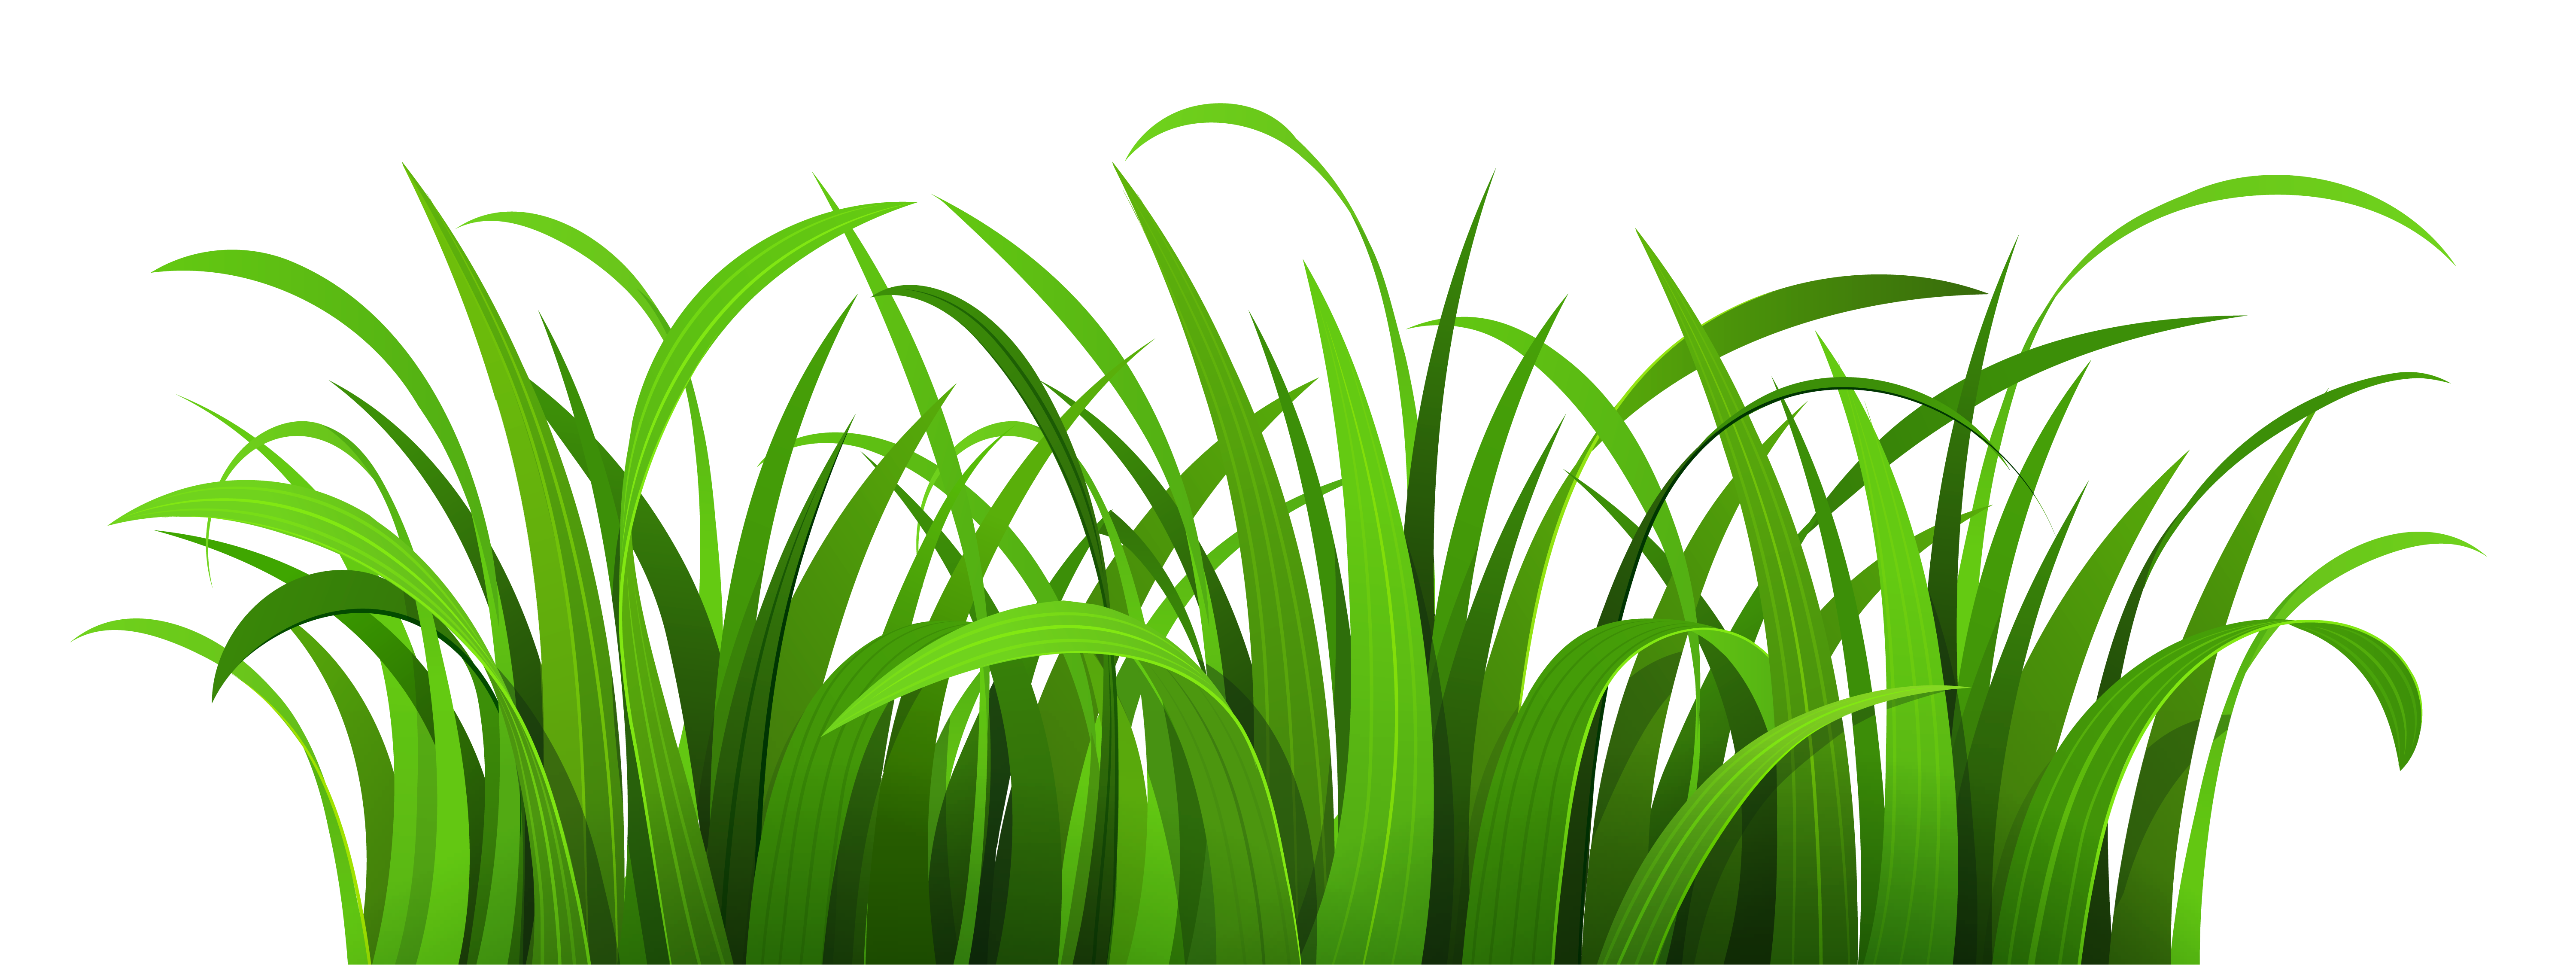 Free Animated Grass Cliparts, Download Free Clip Art, Free.